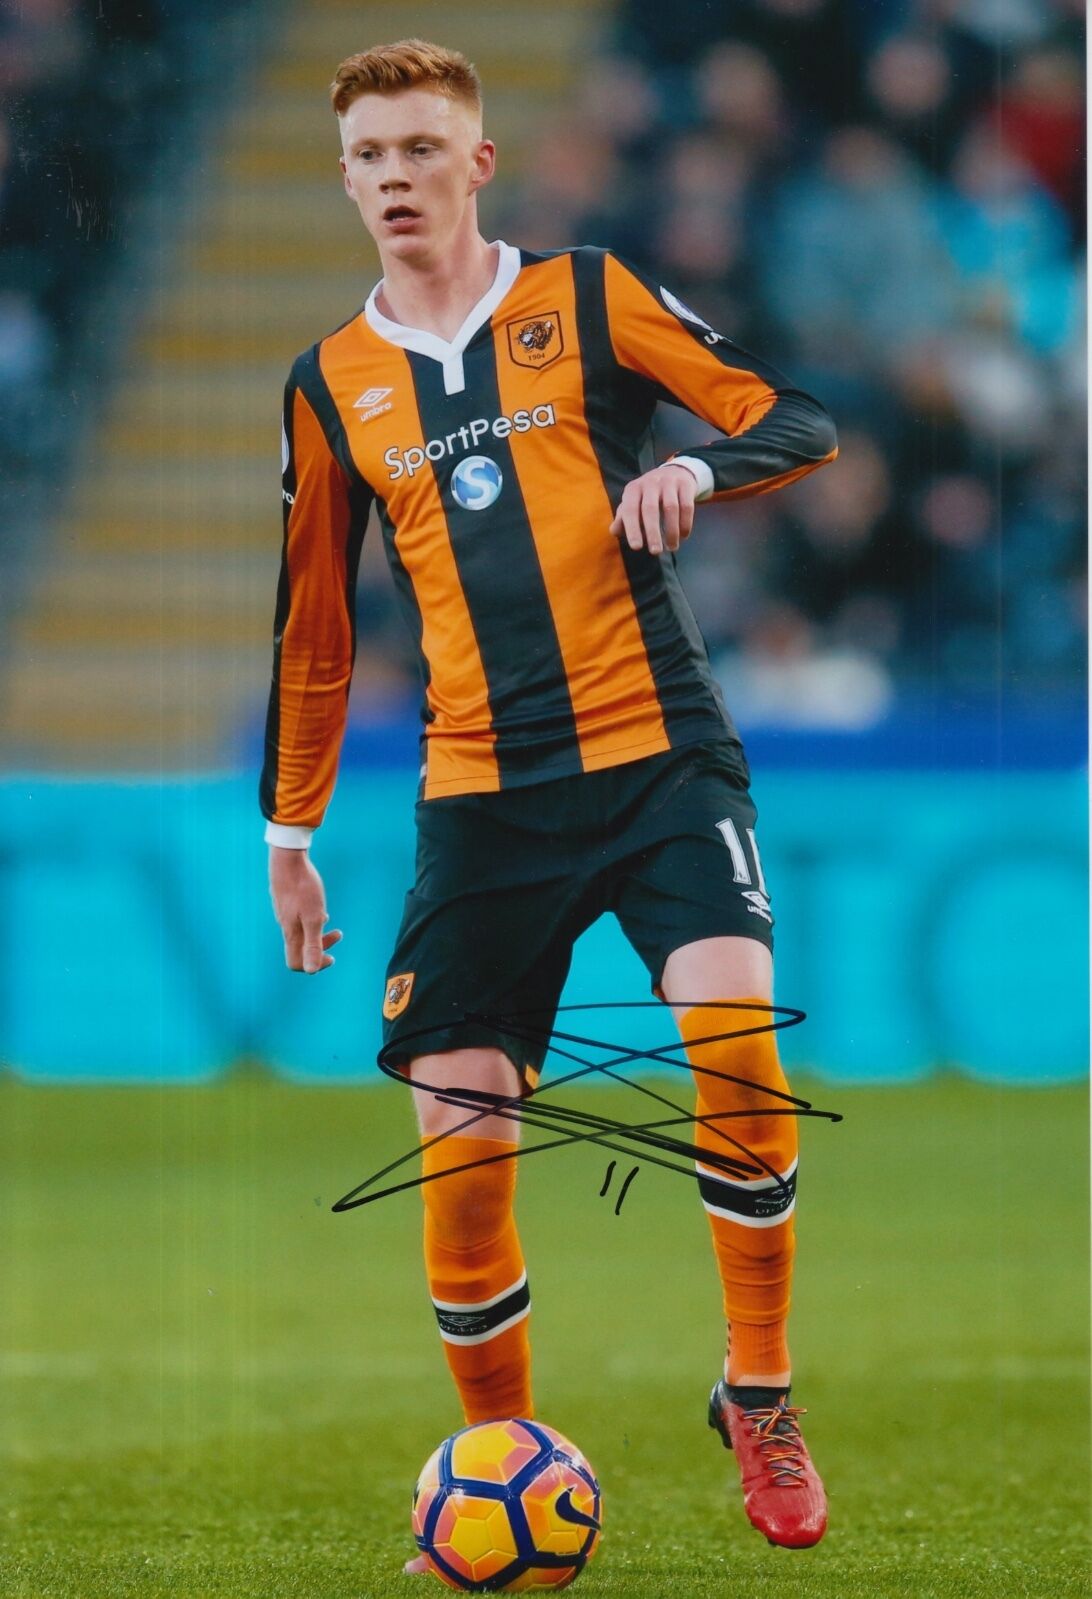 HULL CITY HAND SIGNED SAM CLUCAS 12X8 Photo Poster painting 16/17 5.